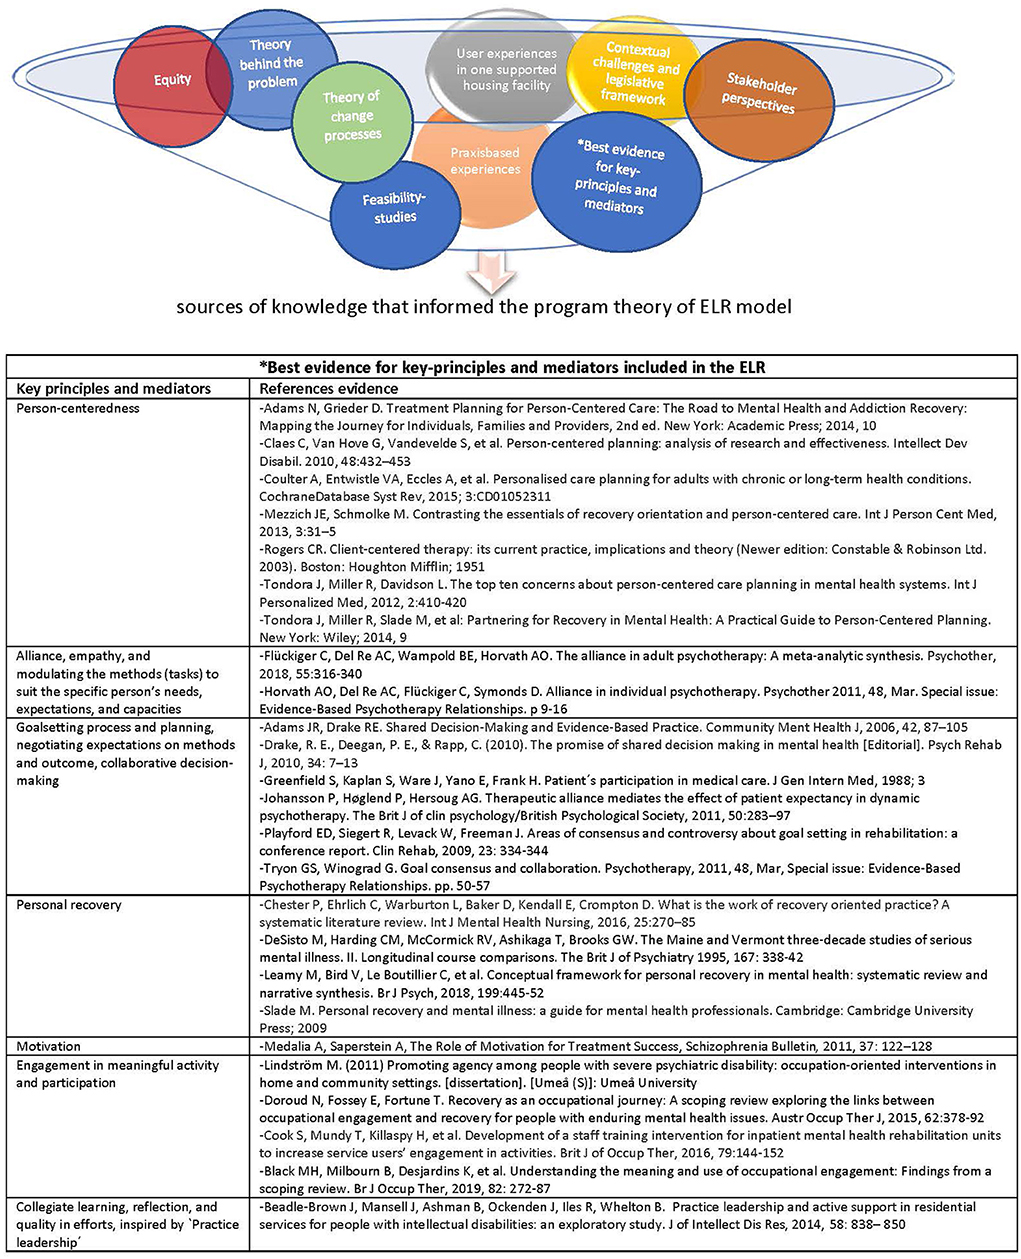 Canadian Occupational Performance and Engagement Model - InfOT